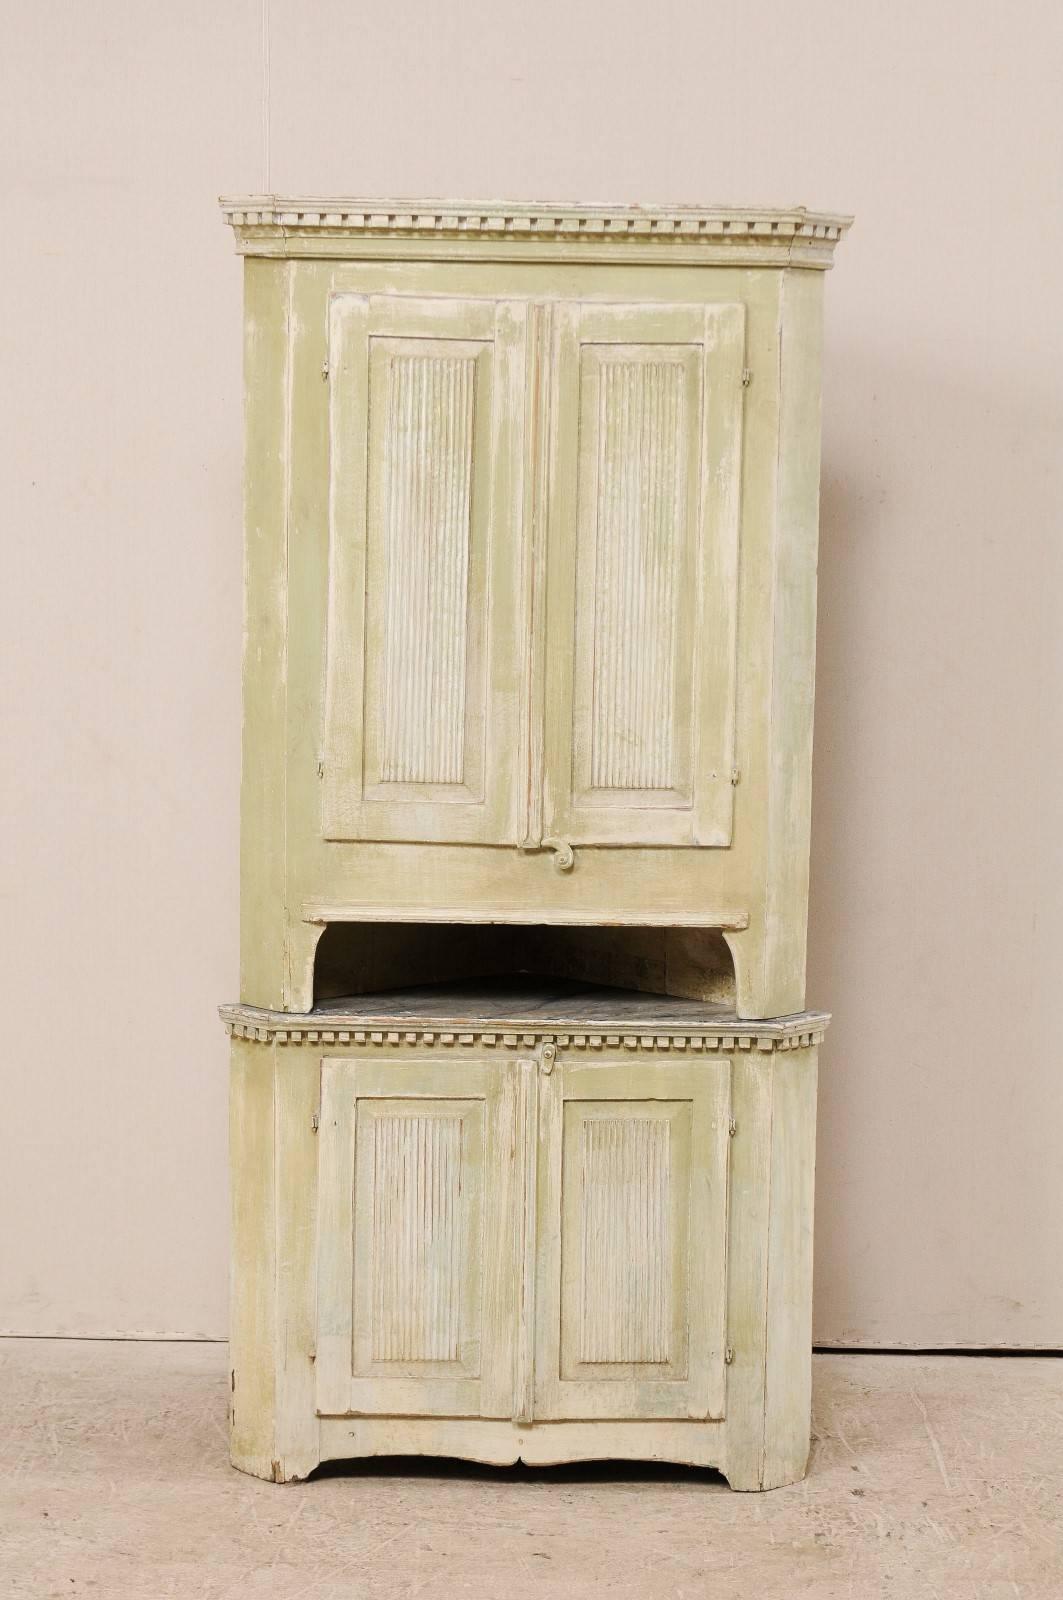 A Swedish late 18th century period Gustavian painted wood corner cabinet. This Swedish Gustavian corner cabinet features reeded doors, dentil molding just below the upper cornice and mid section, and a scalloped accolade style carved skirt. This